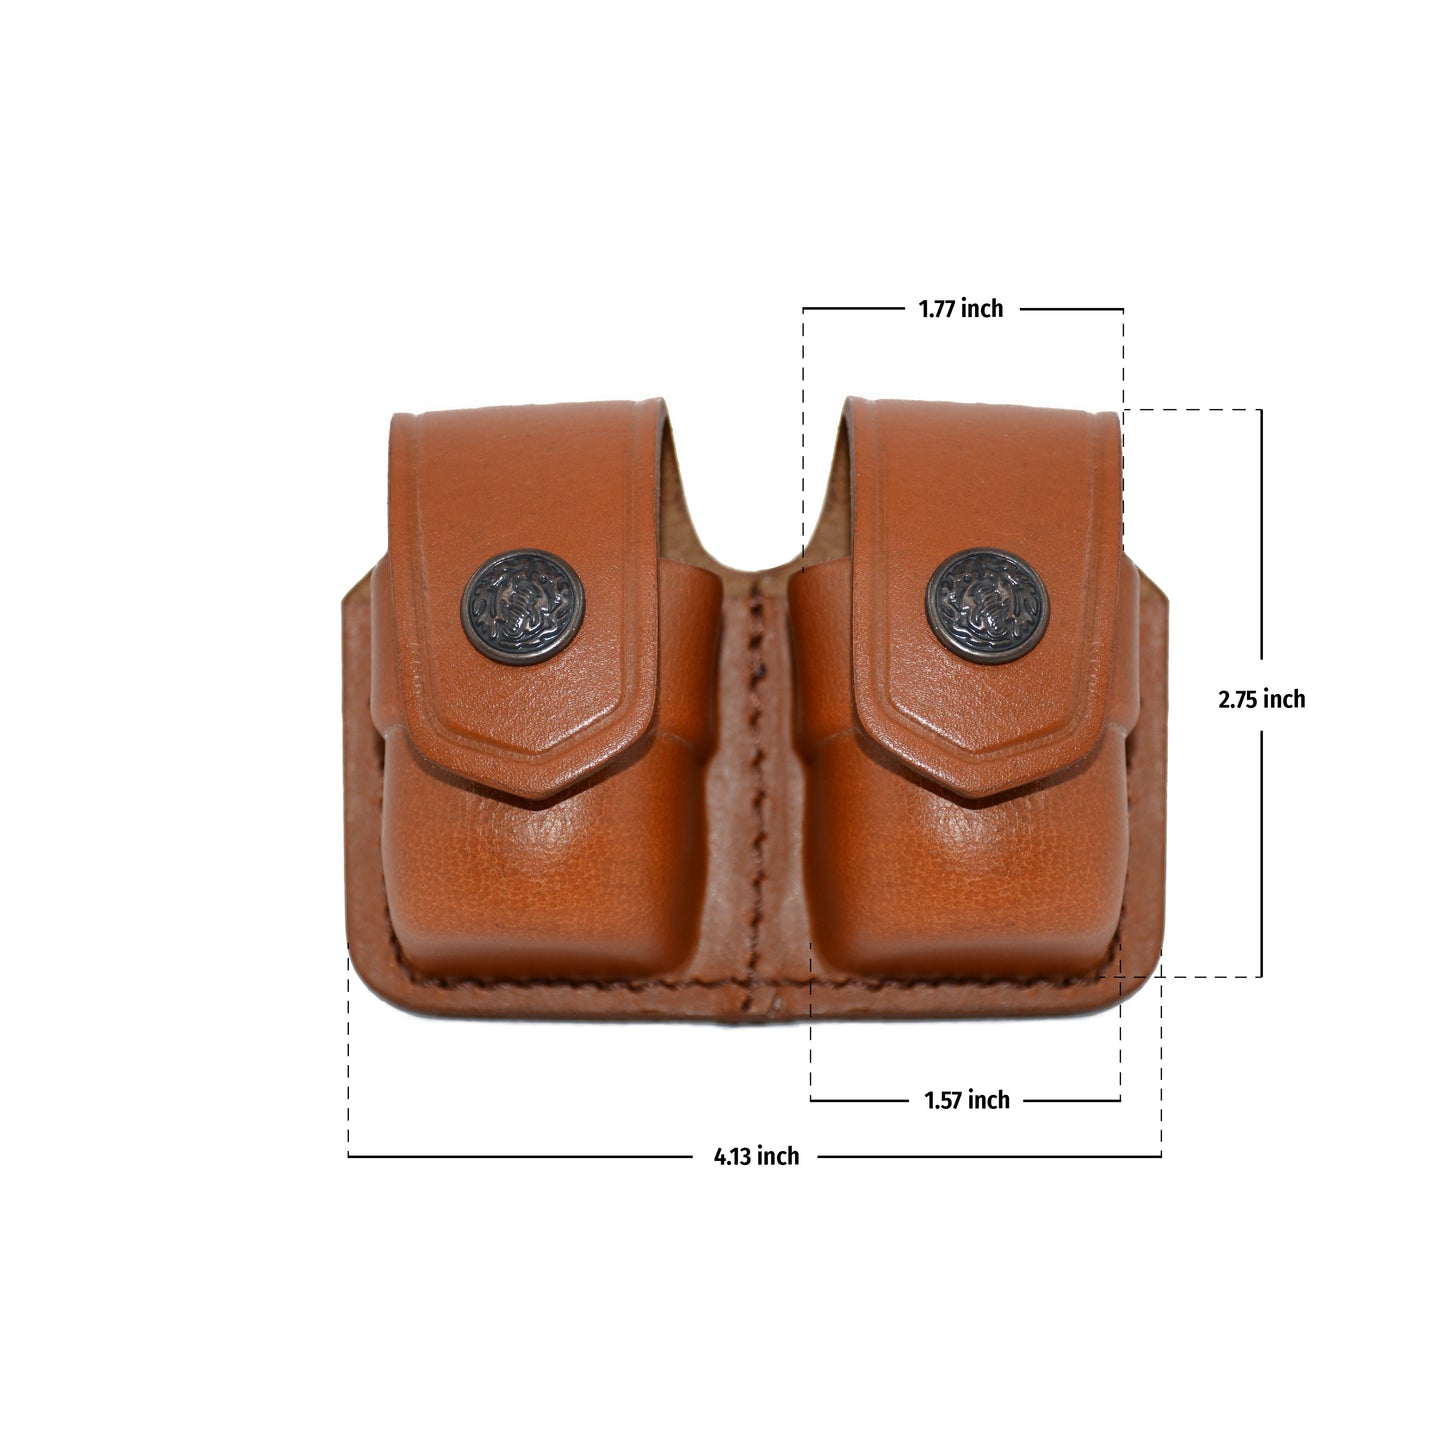 Double Speedloader Carrier/Case/Pouch for S&W 357 Magnum Genuine Leather Handmade (BL038)